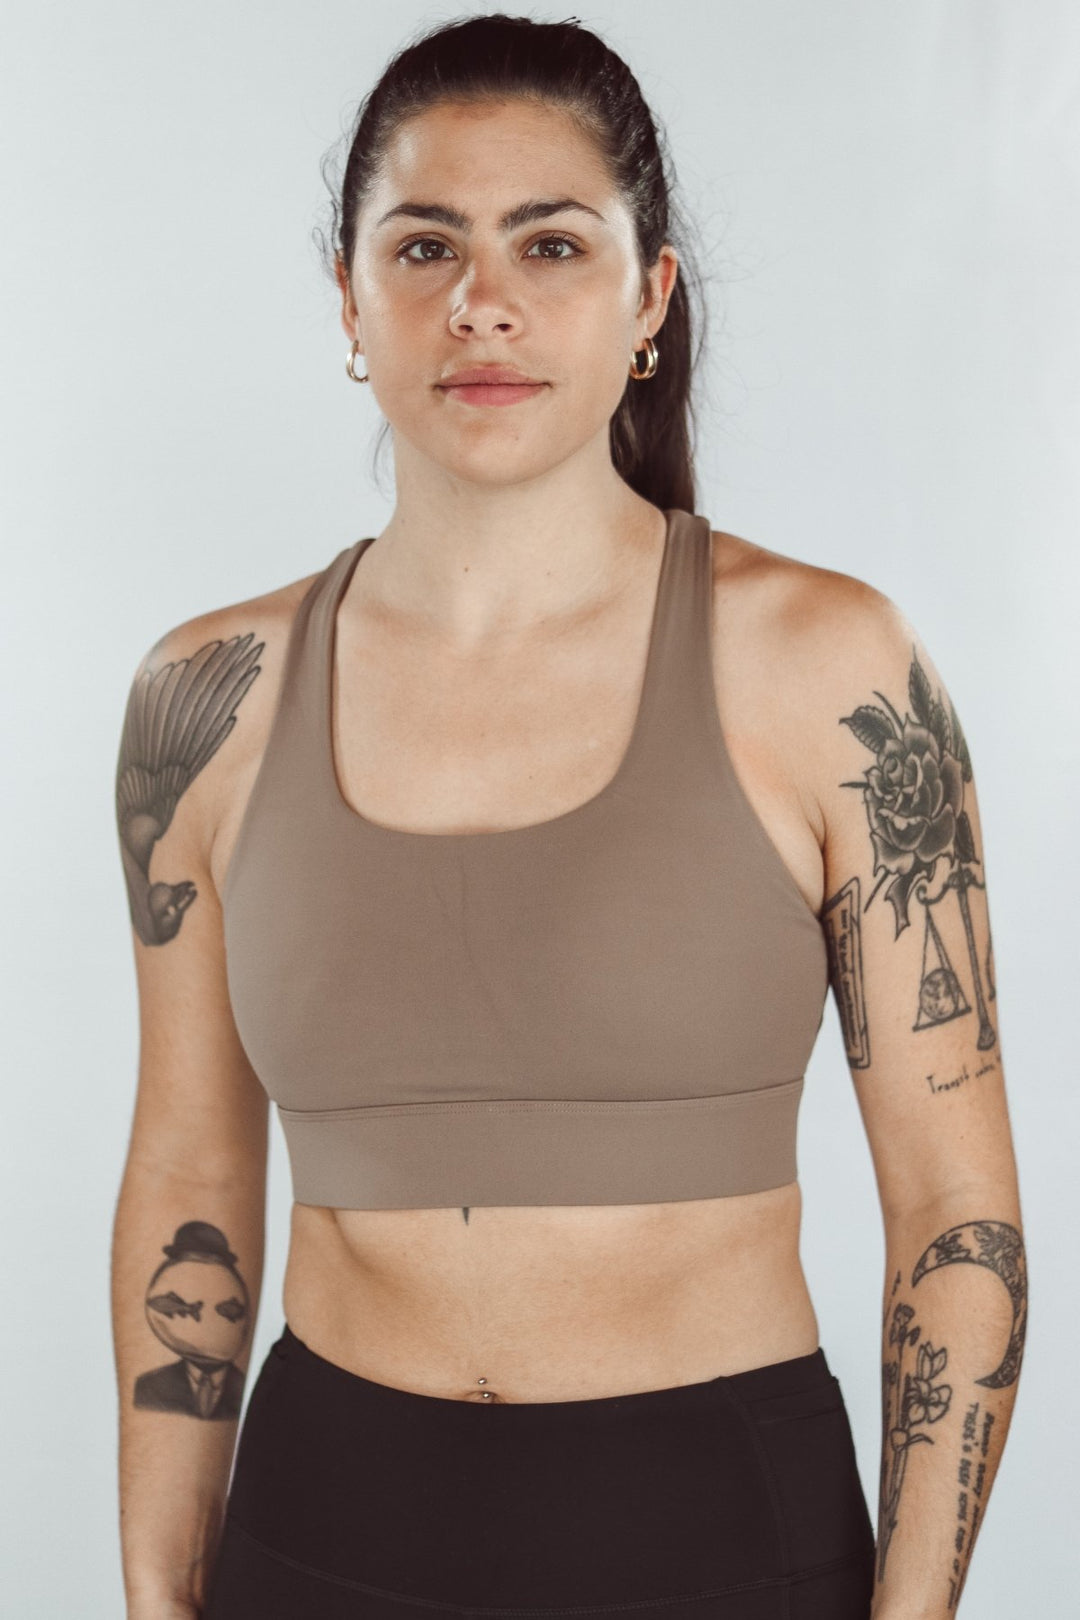 Rbx Active Sports Bra Gray - $10 (50% Off Retail) - From Katelyn